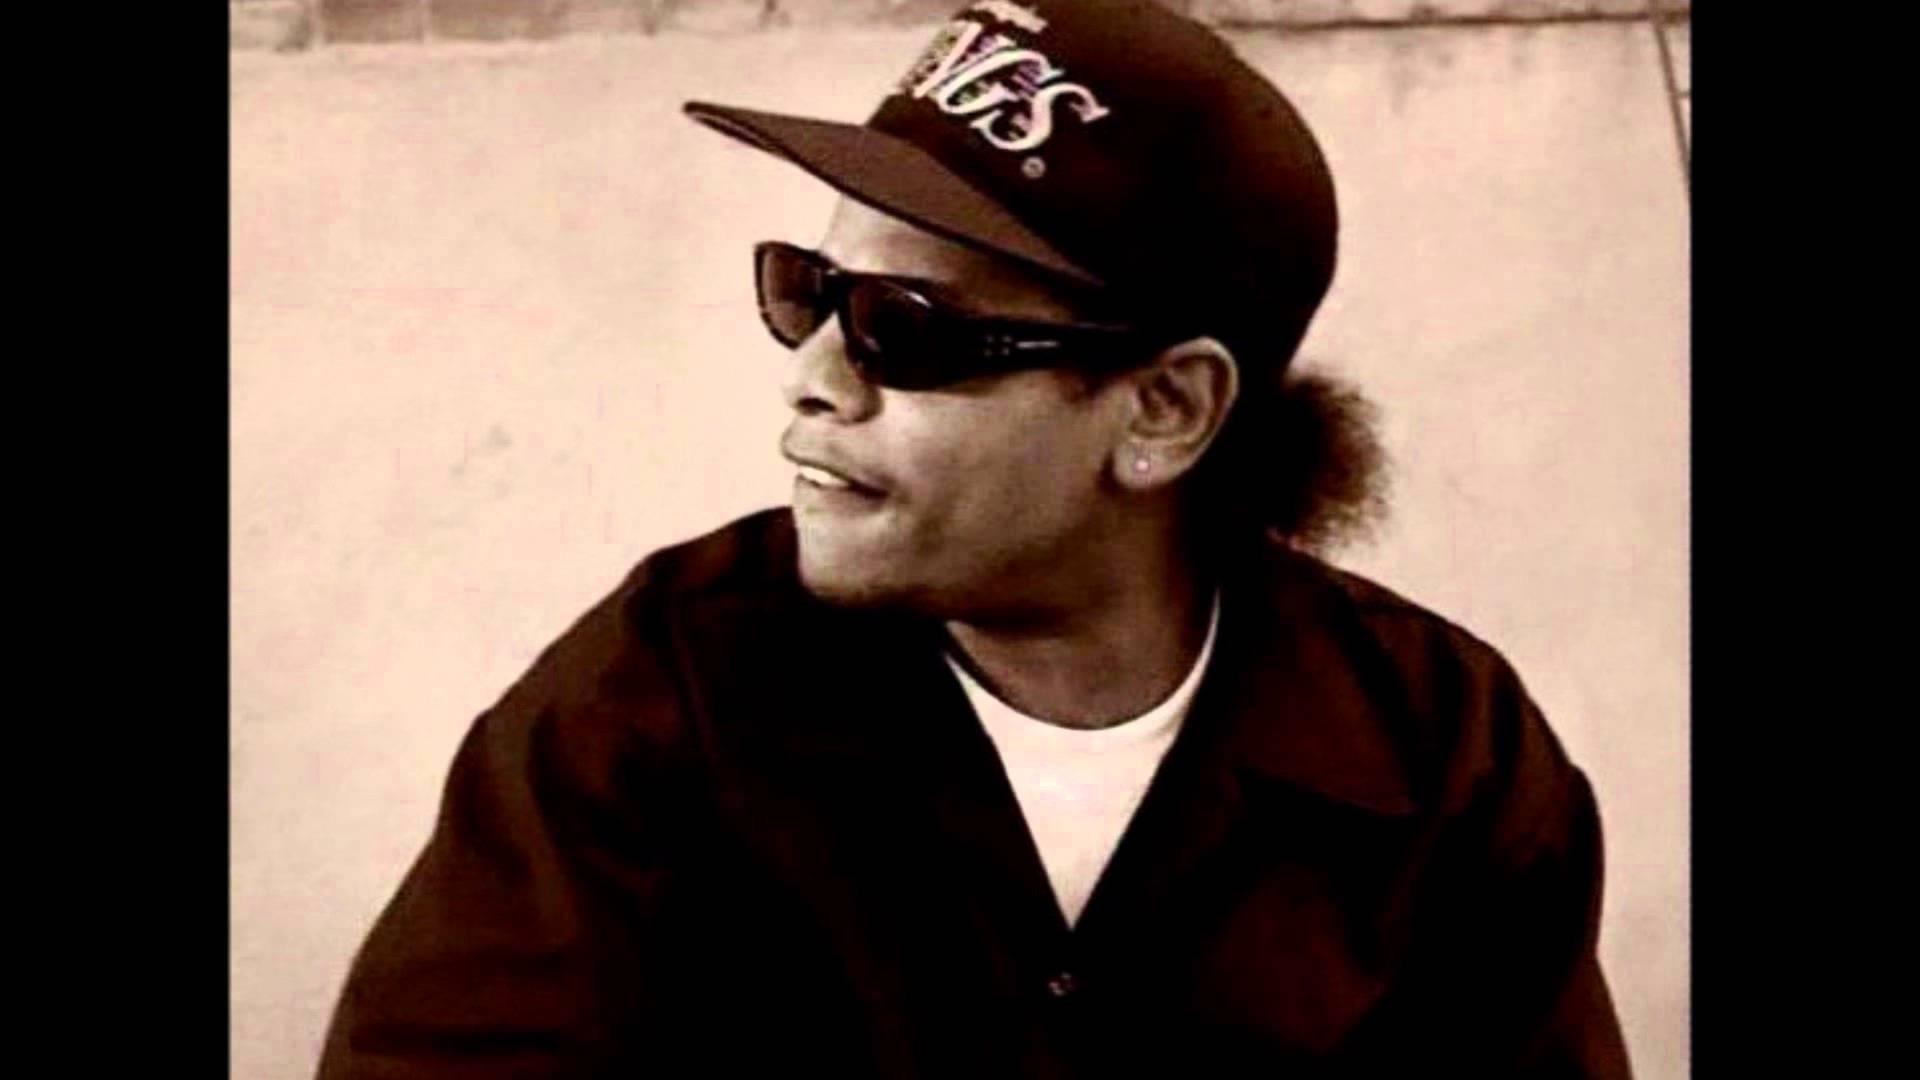 Eazy E   Real Muthaphukkin Gs [Dre Day Beat Remix]